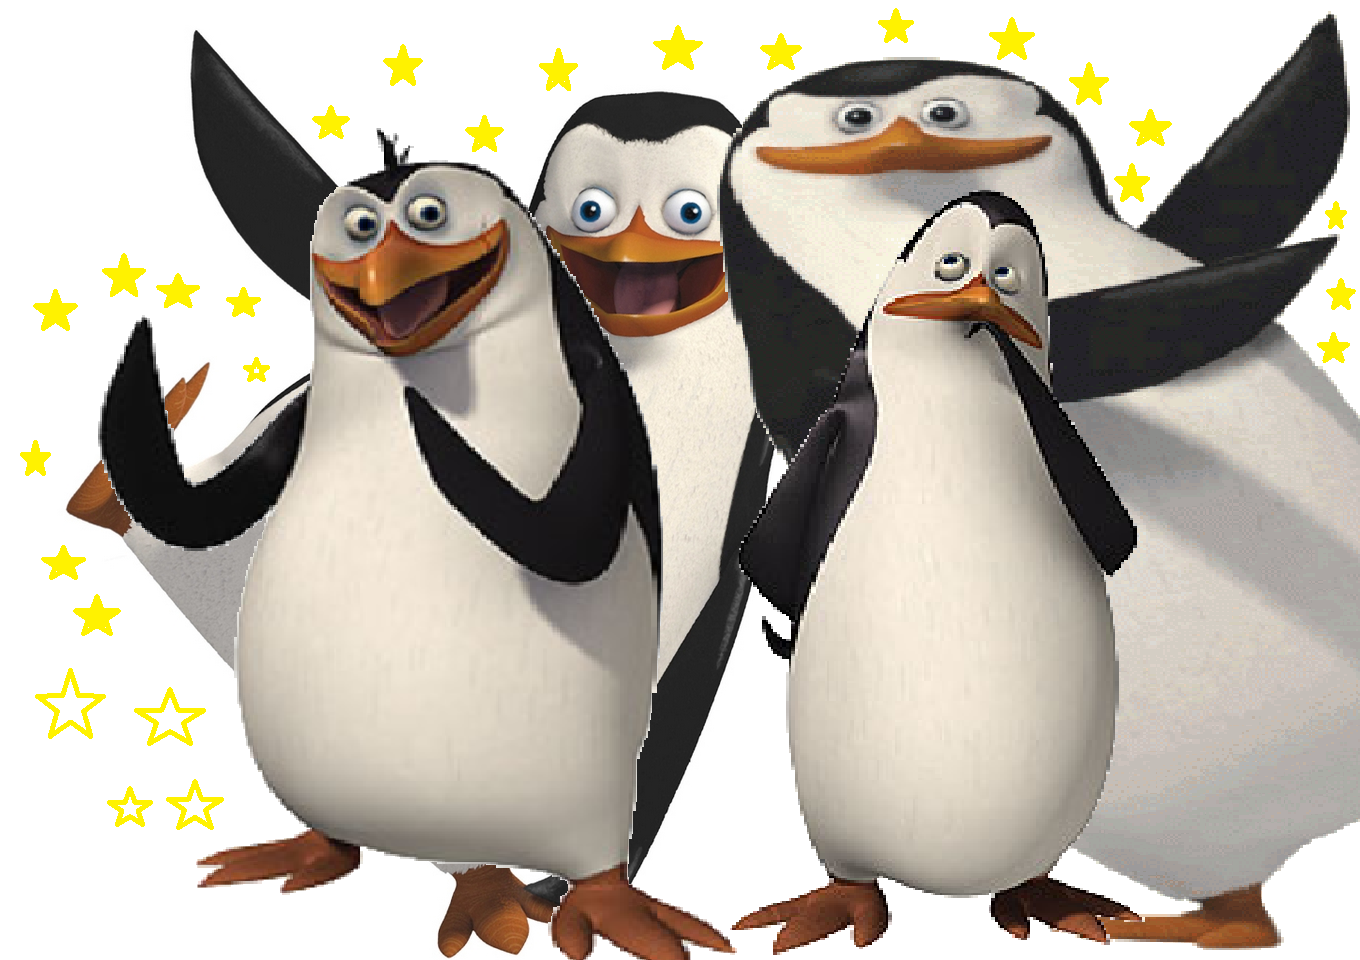 The-team-penguins-of-madagascar-22587911-1360-960.png